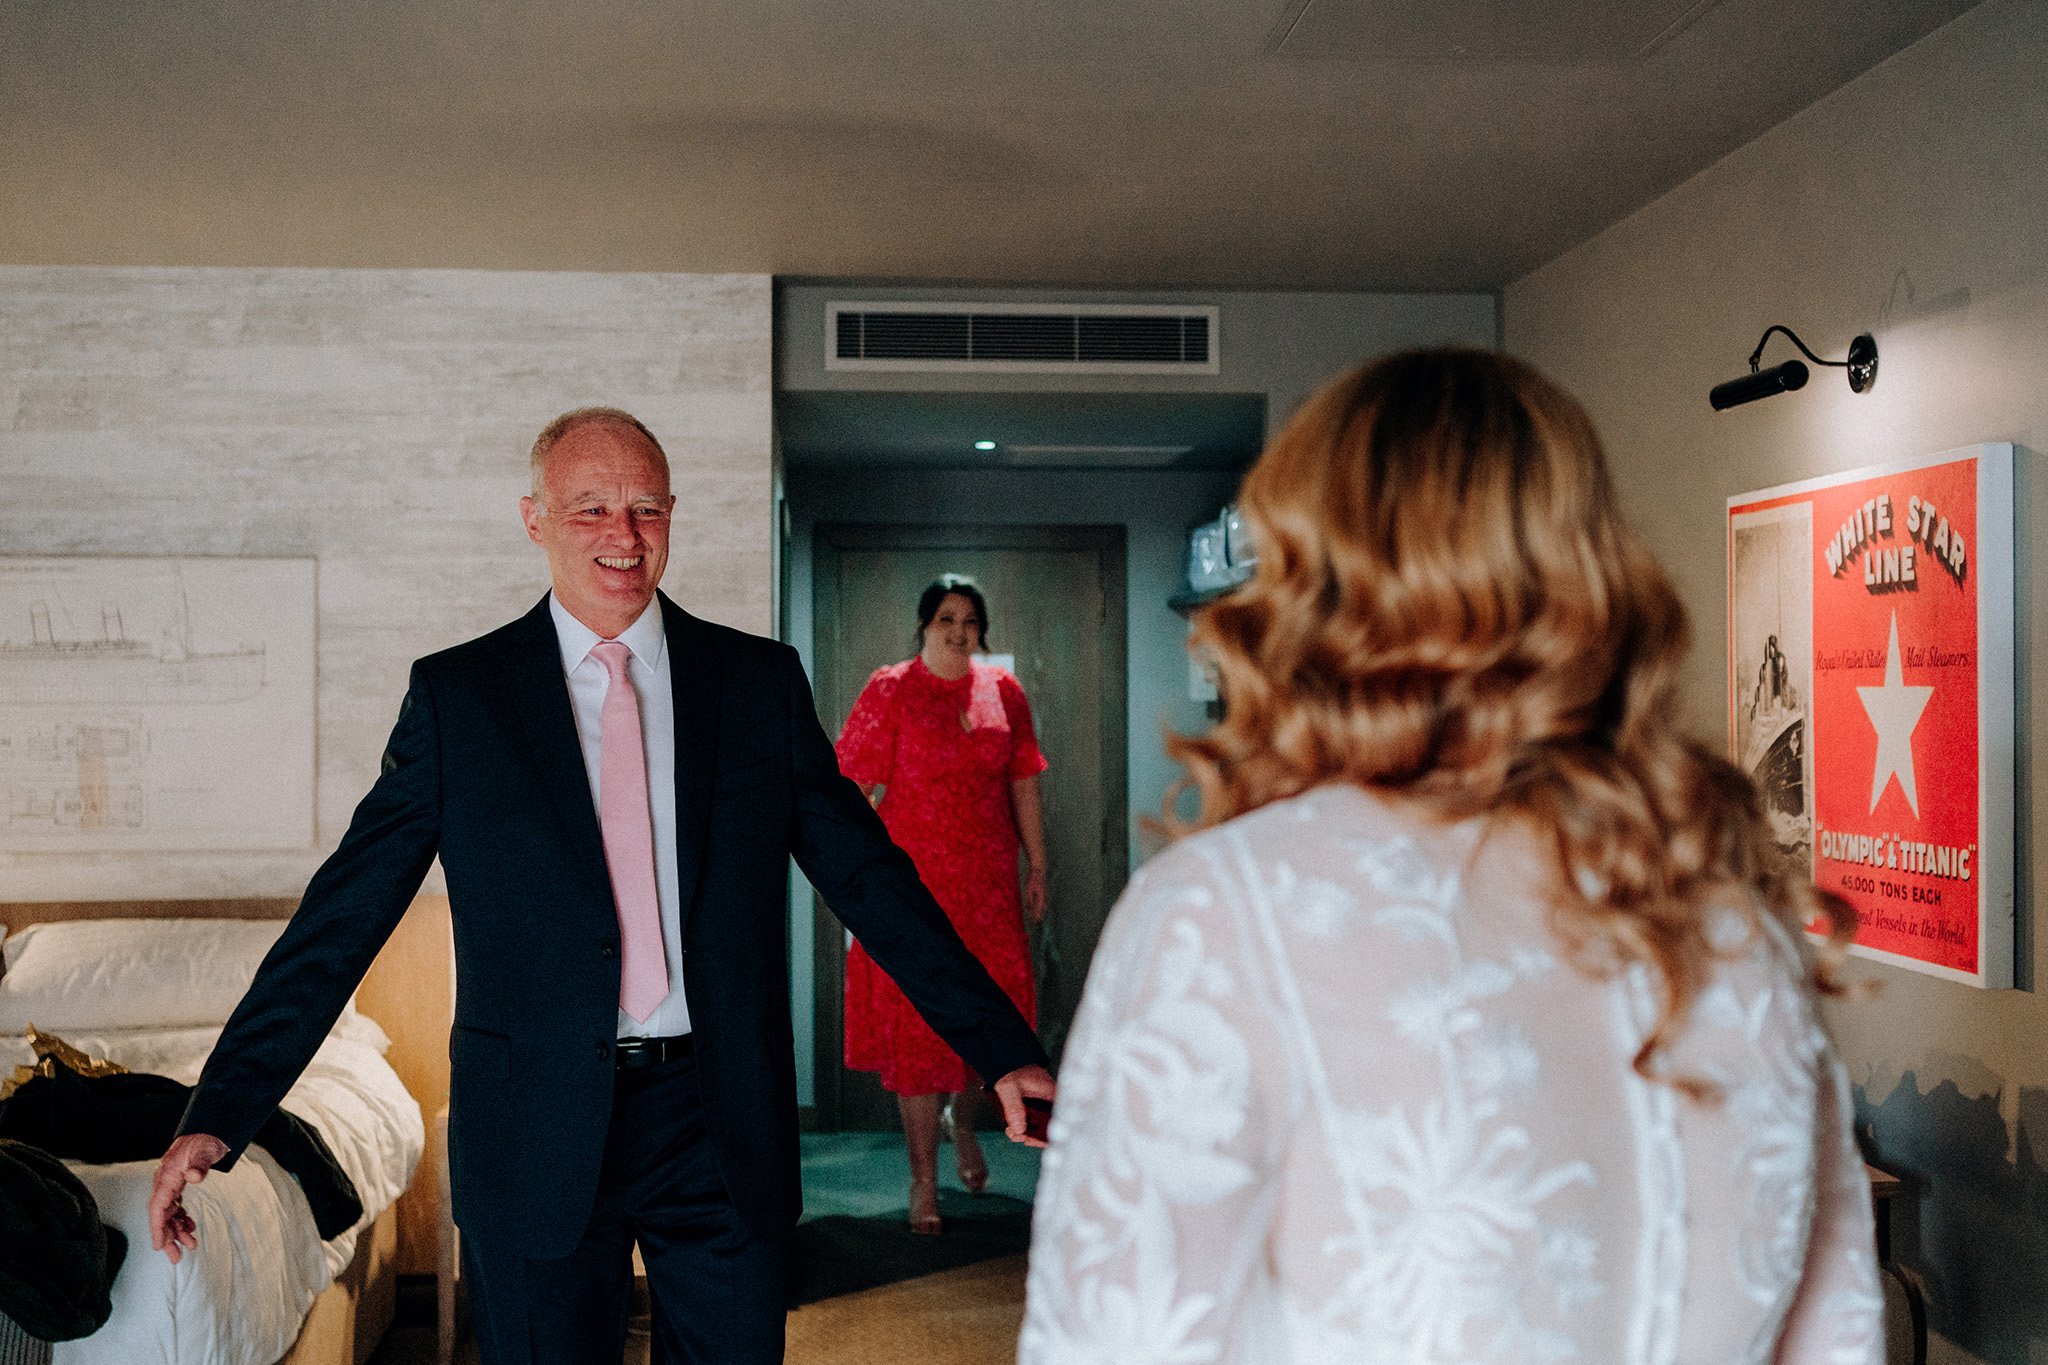 Father happy reaction to seeing his daughter in her wedding dress on the morning of her wedding